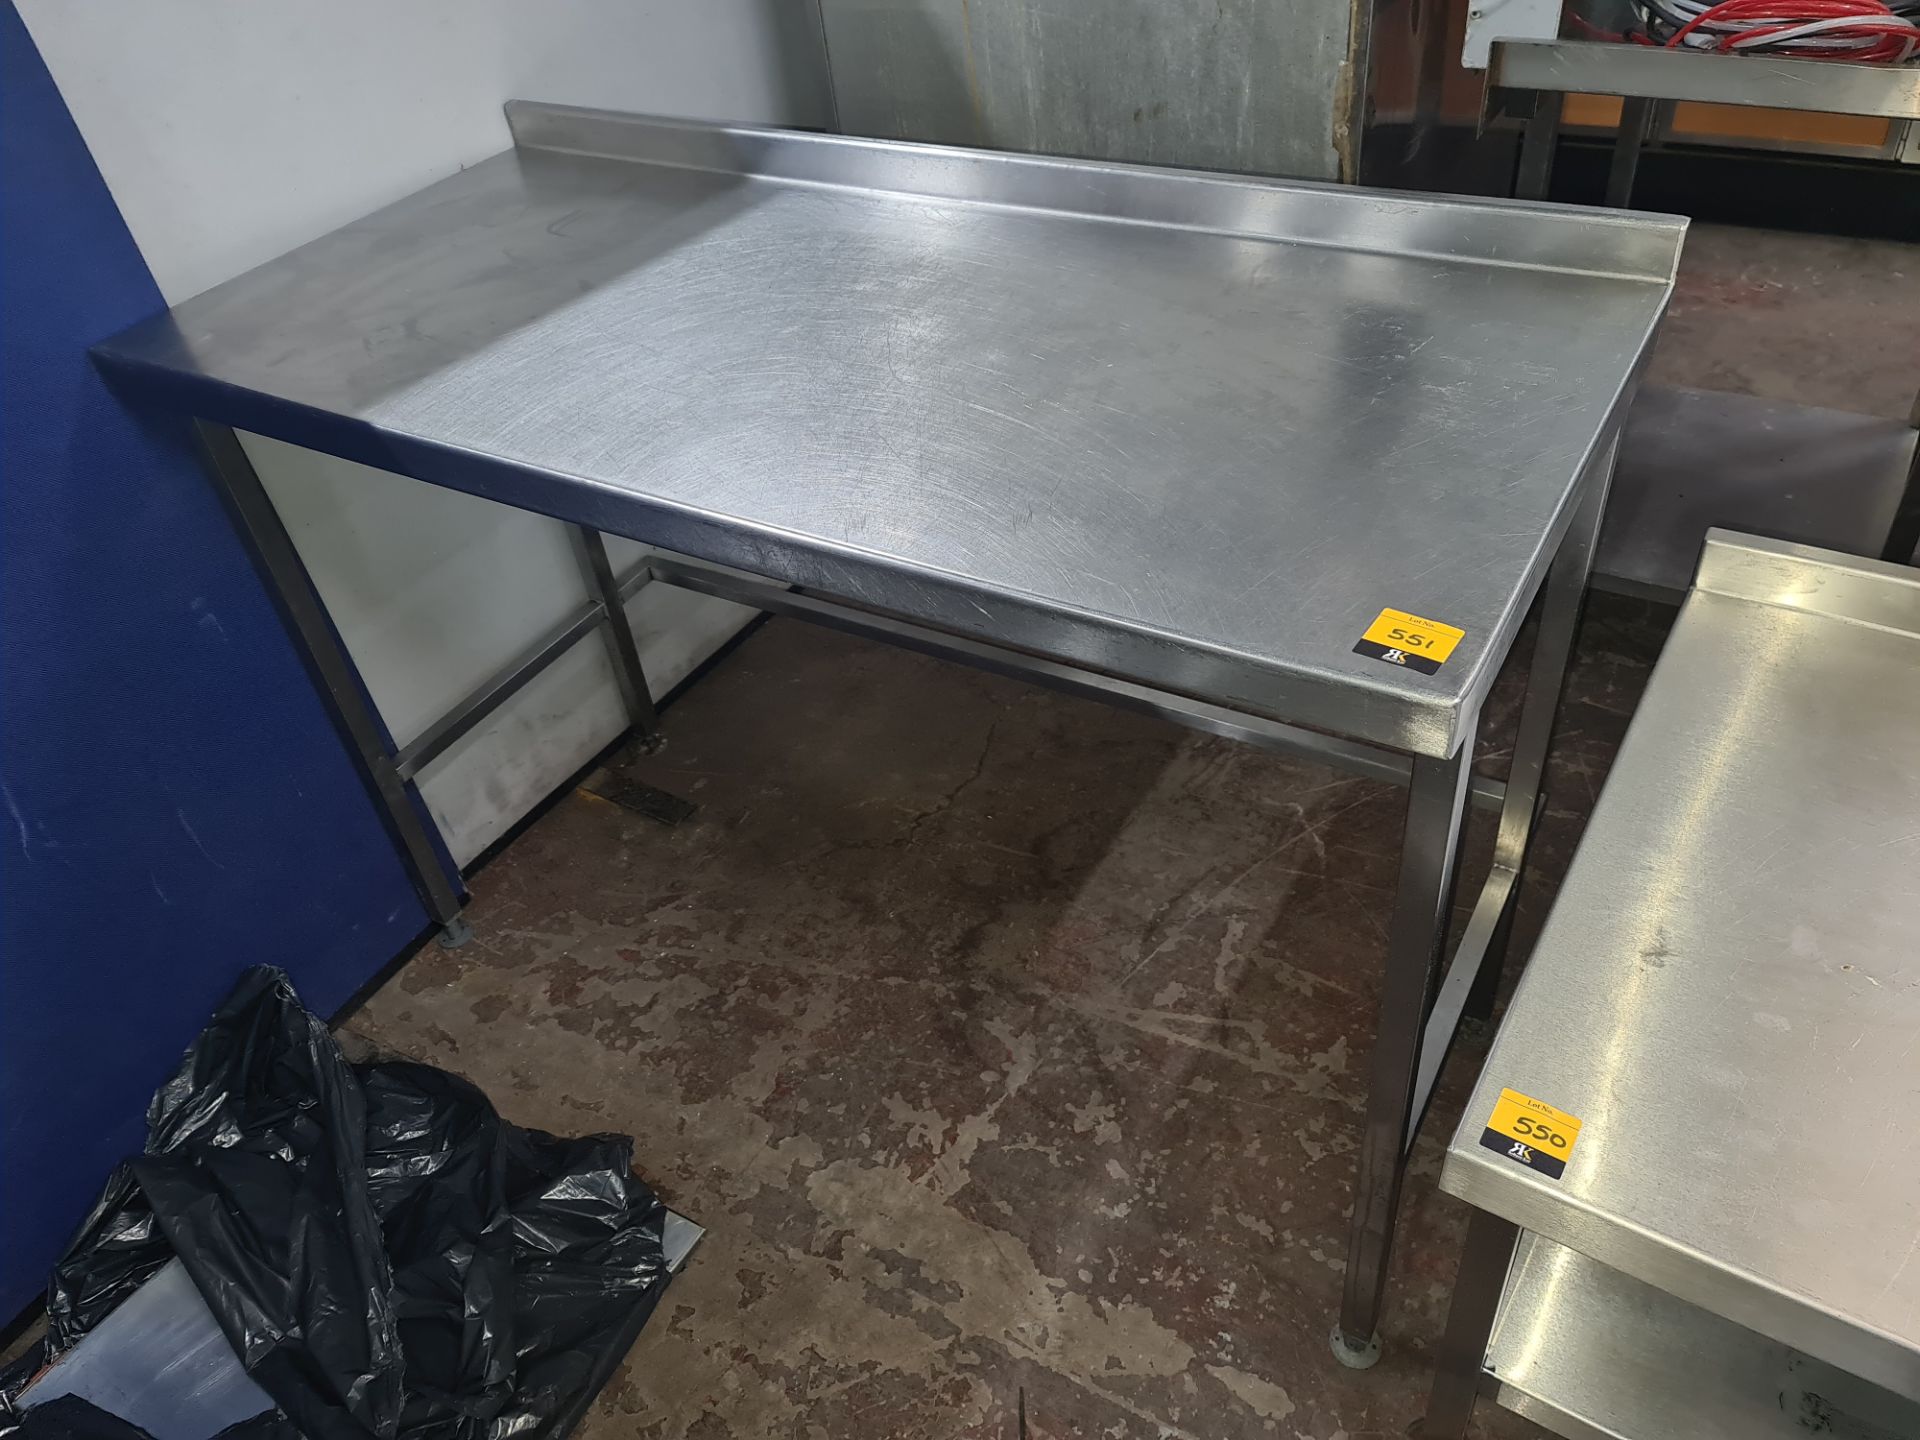 Stainless steel tall table with splashback measuring approx. 1300mm x 595mm